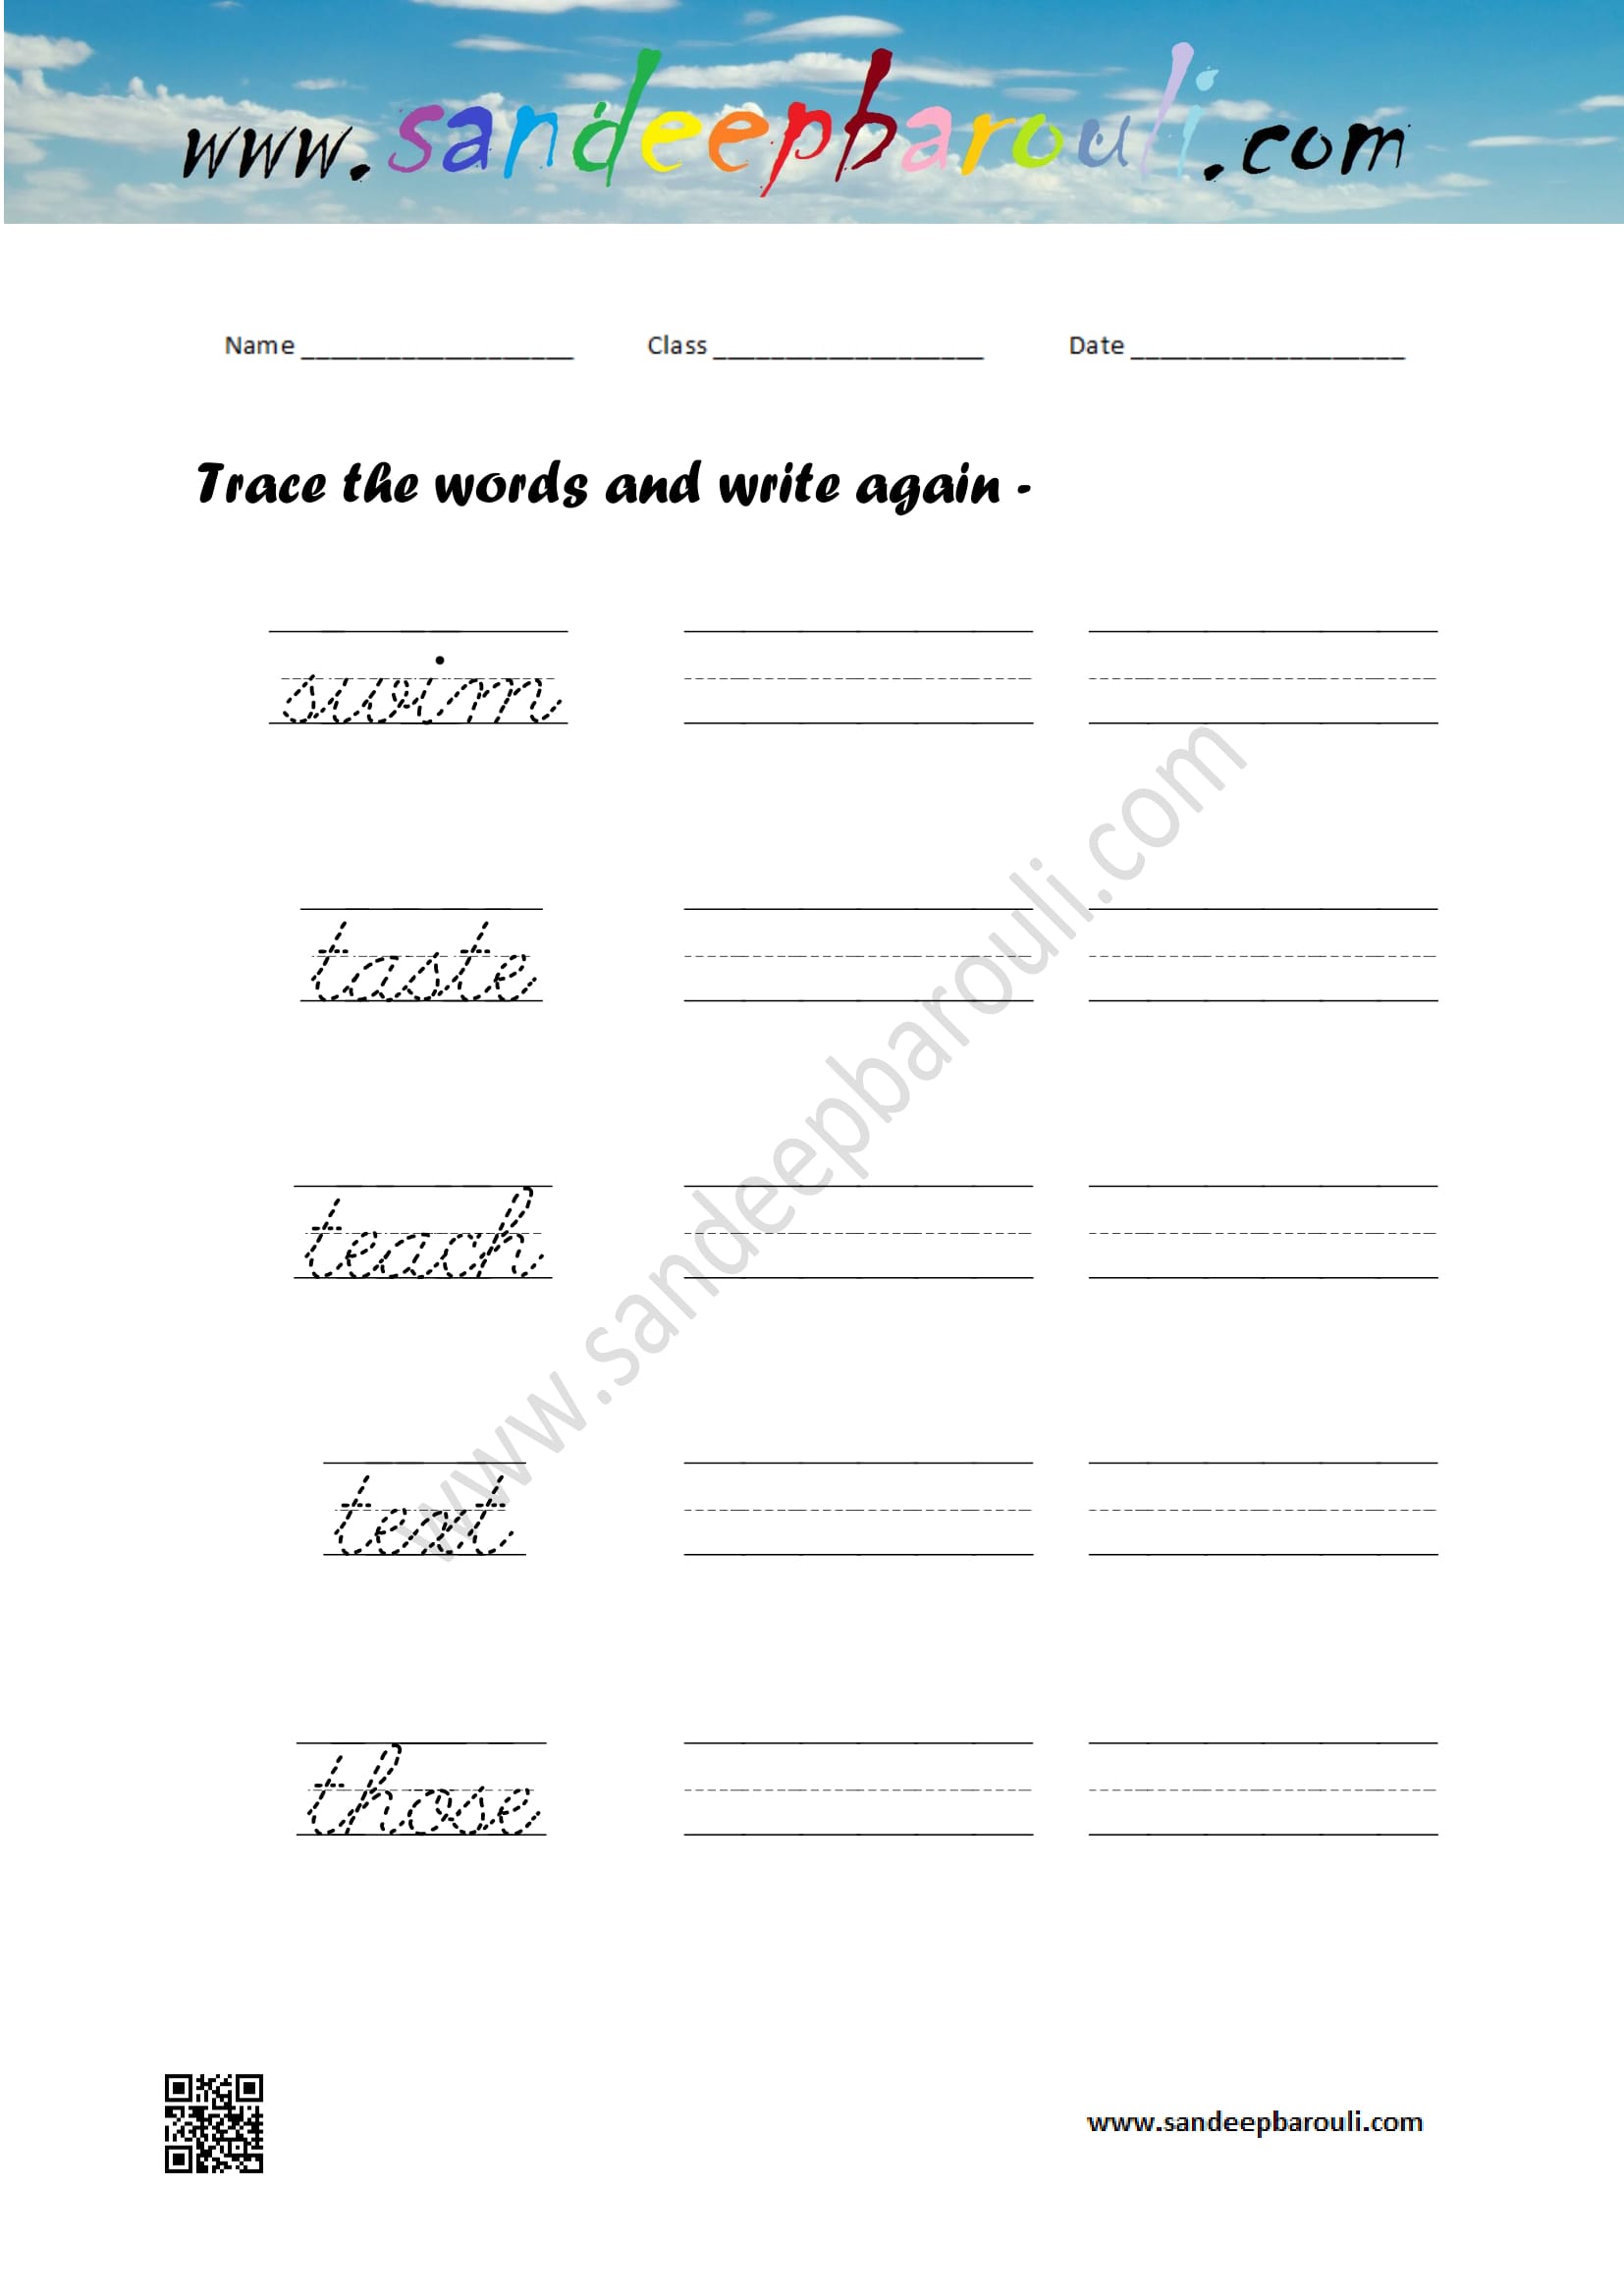 Cursive writing worksheet – trace the words and write again (111)